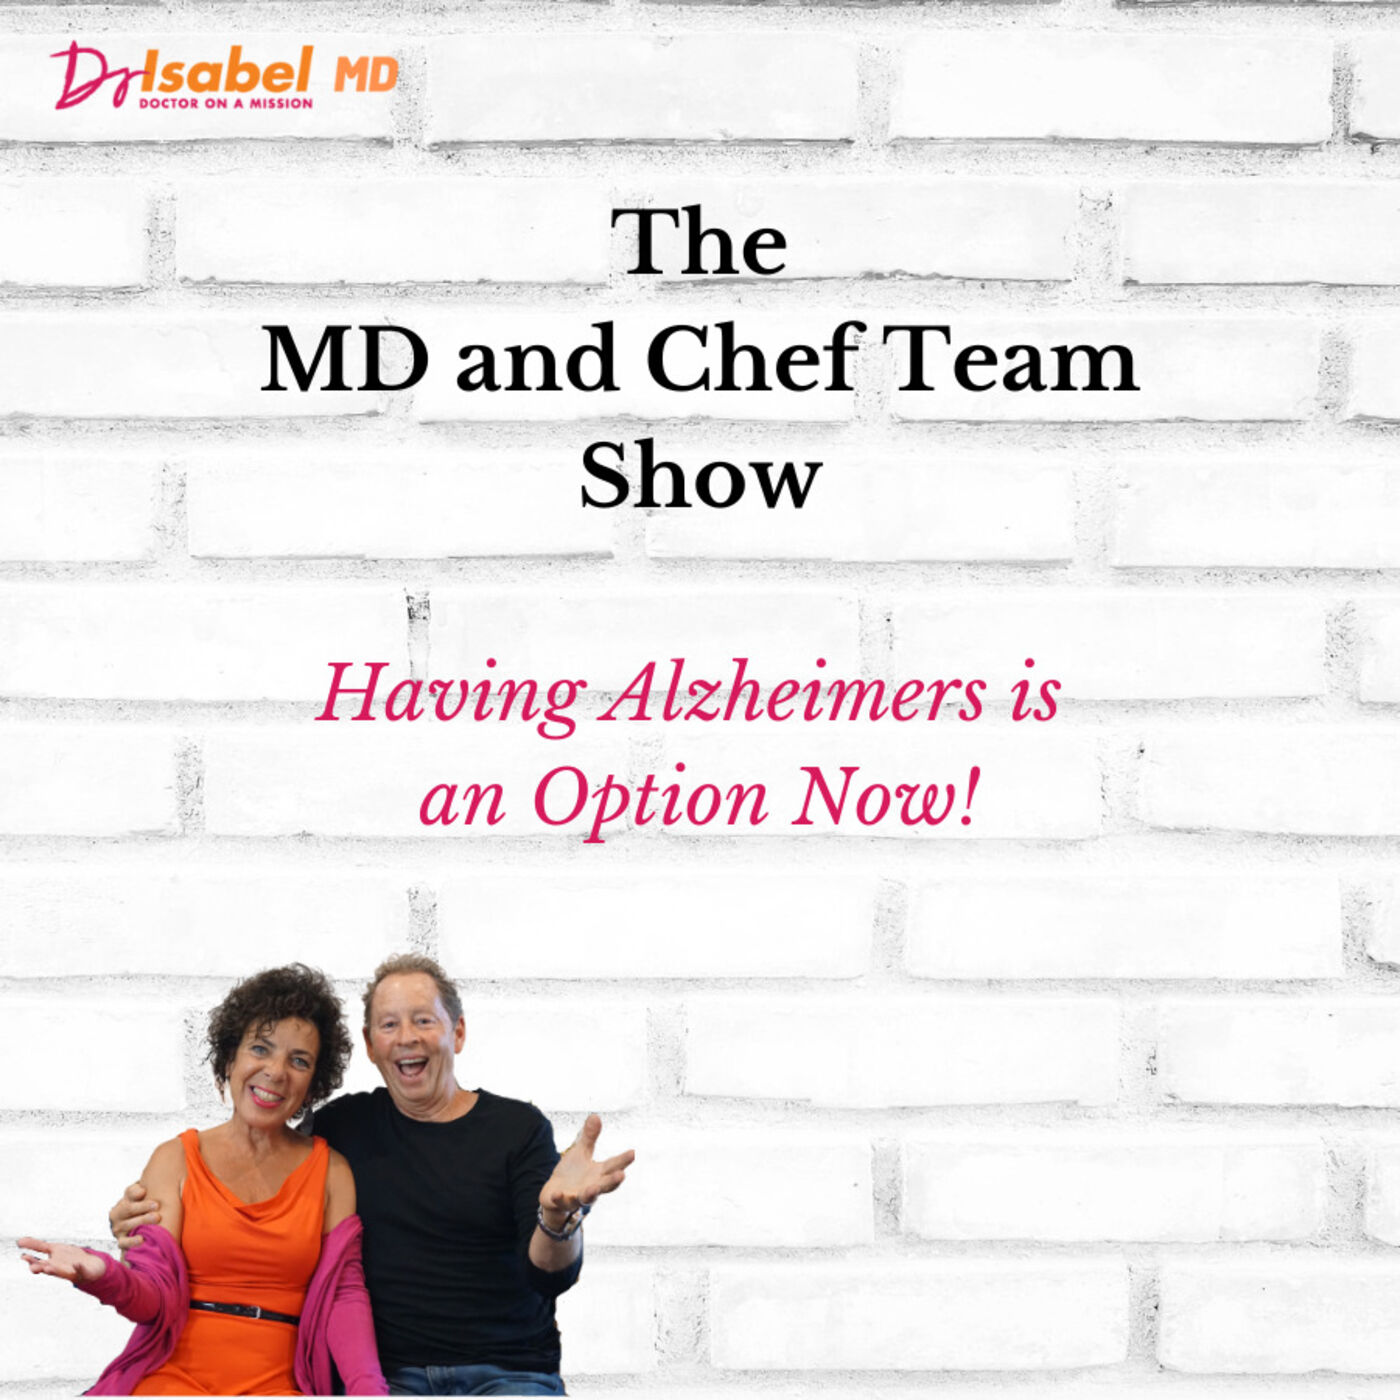 Did you know, having Alzheimers is an Option Now!